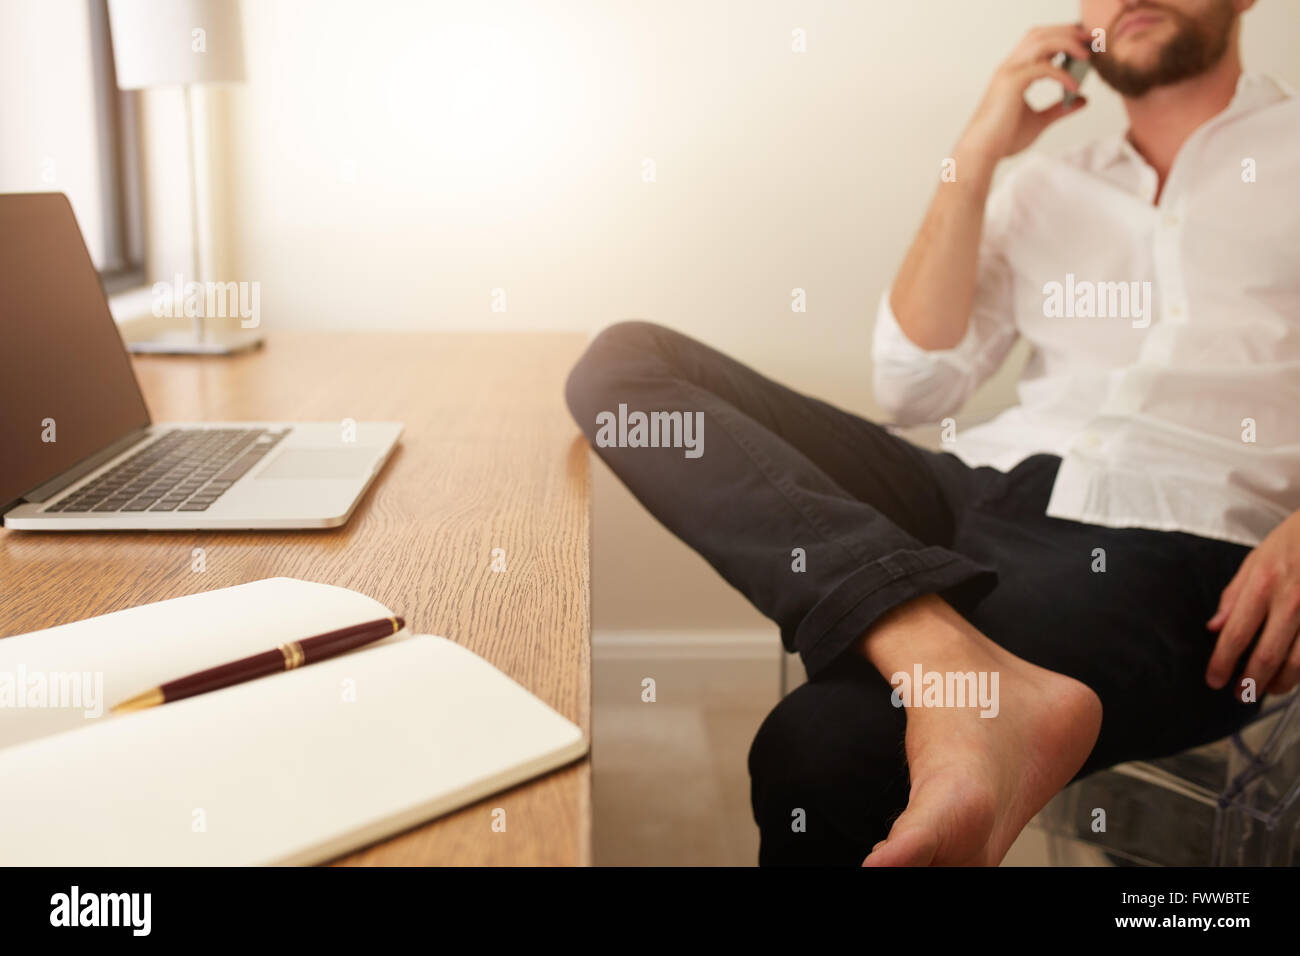 Diary and laptop on desk with businessman sitting in background making a phone call. Home office worktable. Stock Photo